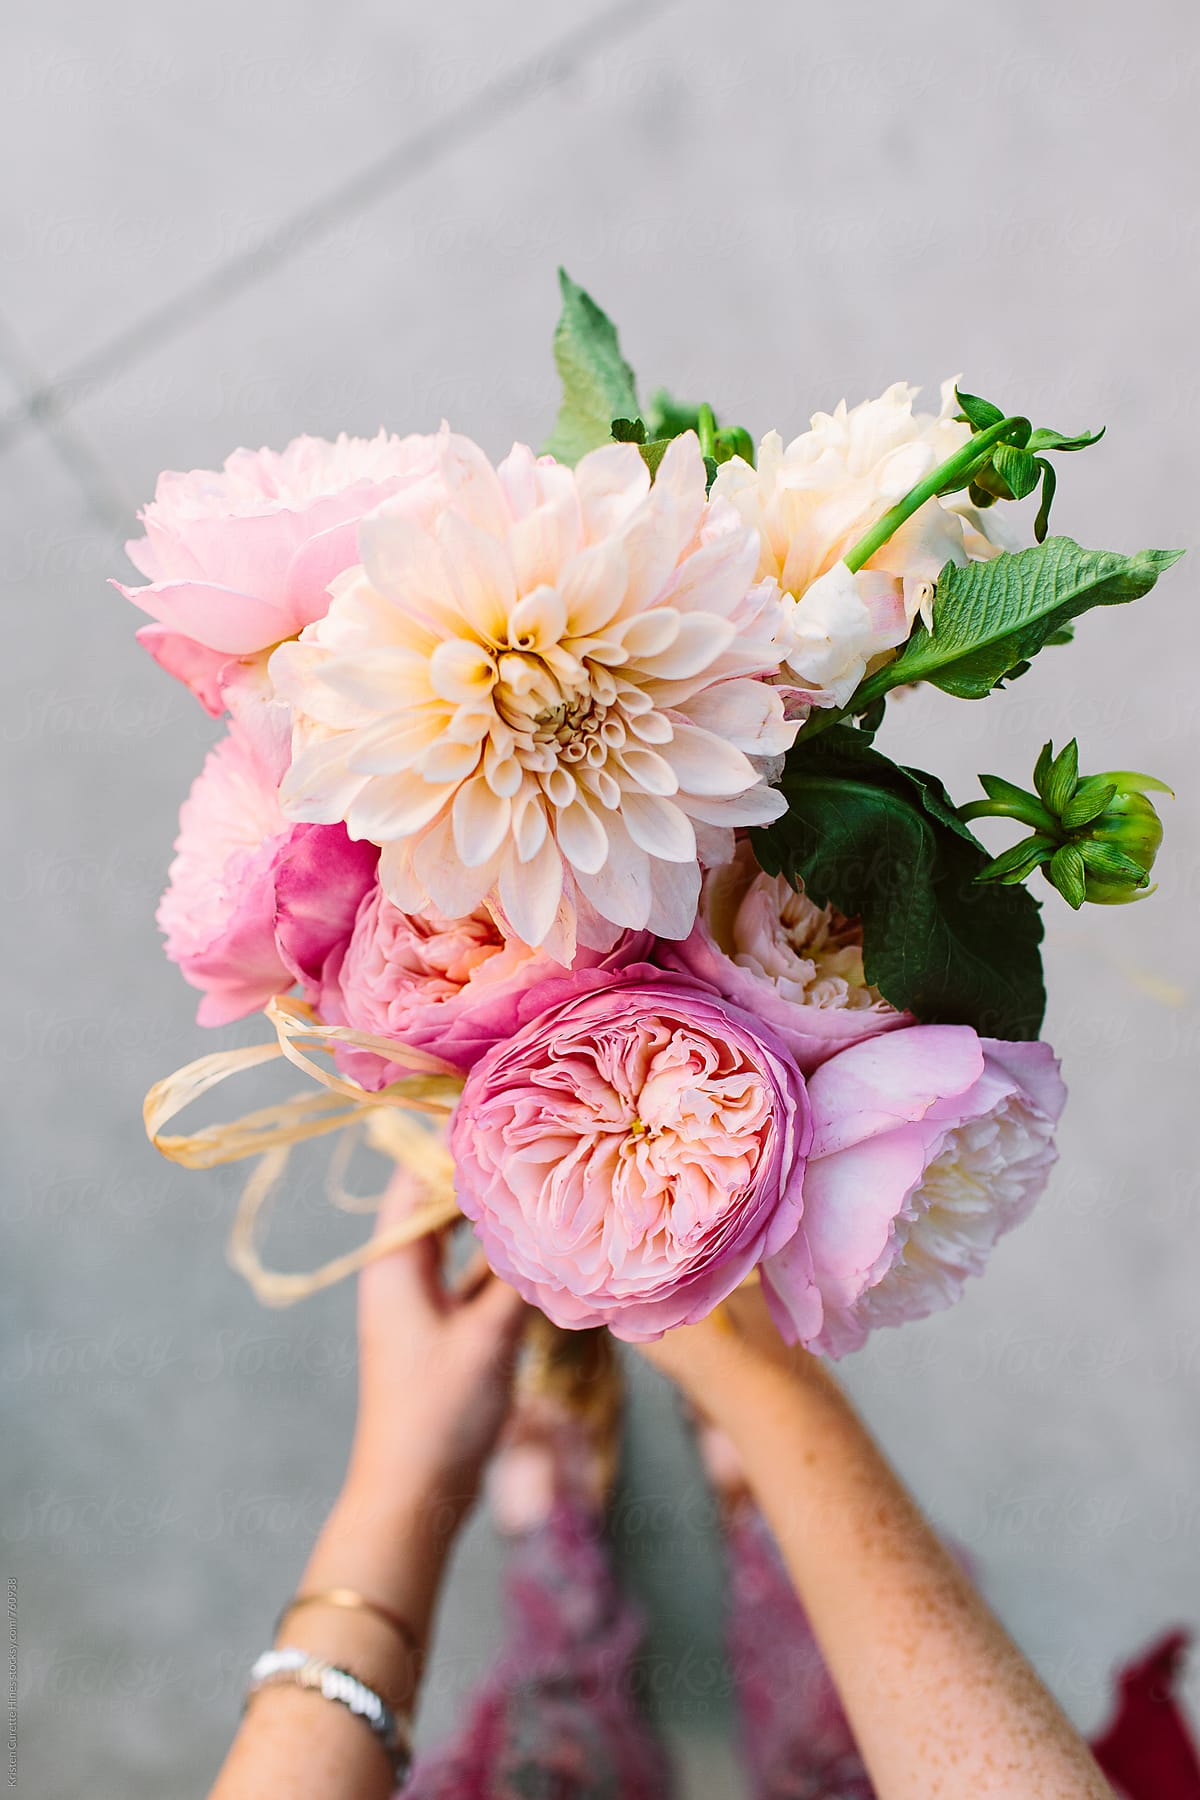 A first person view of someone holding a dahlia & garden rose arrangement.